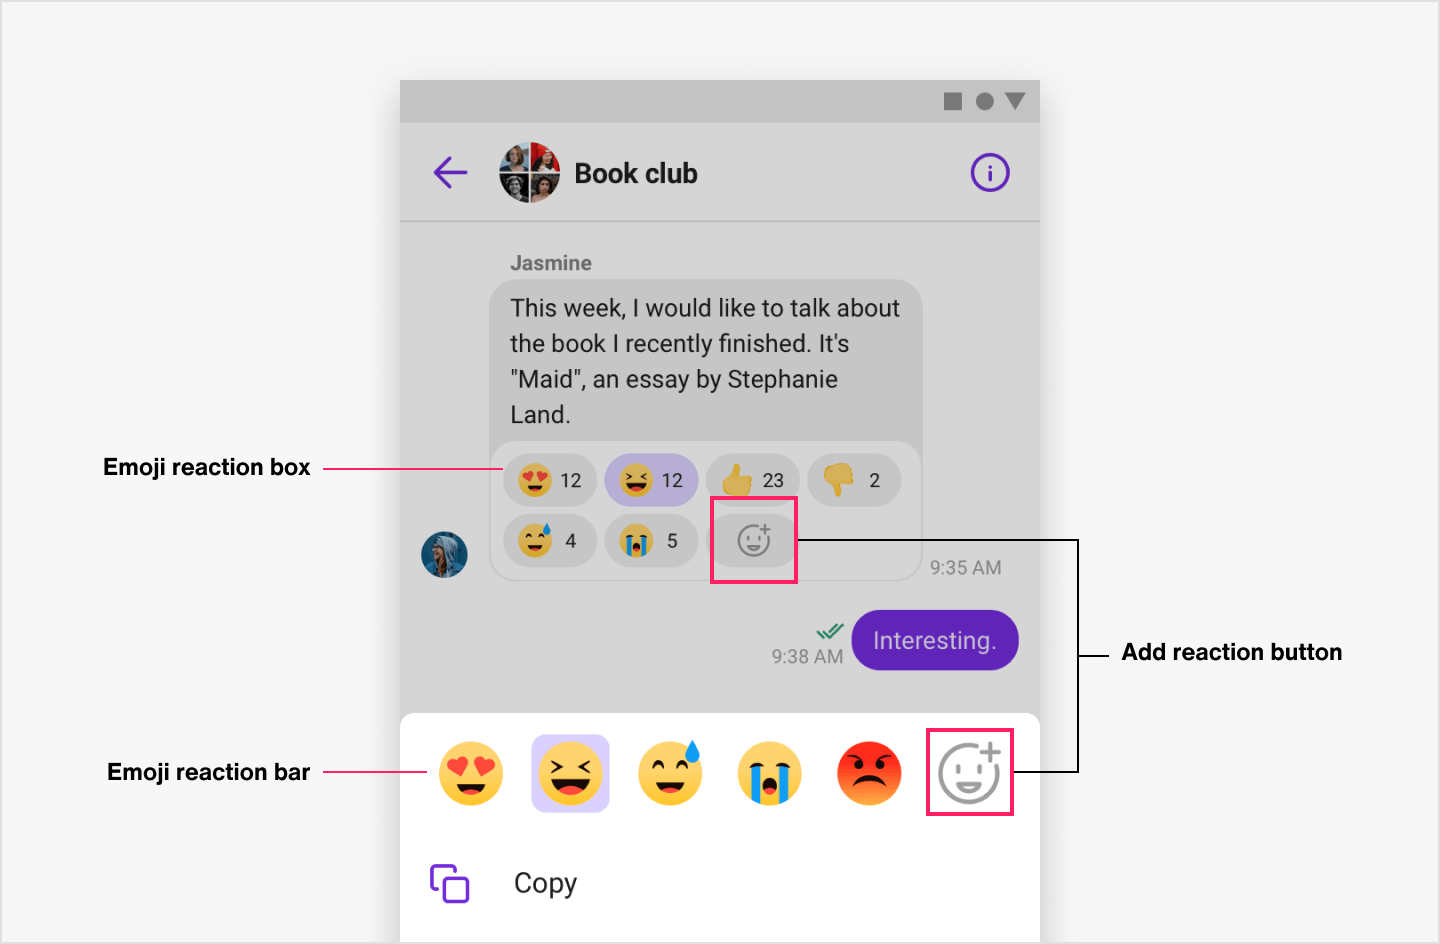 Image|Reaction components in a chat view.